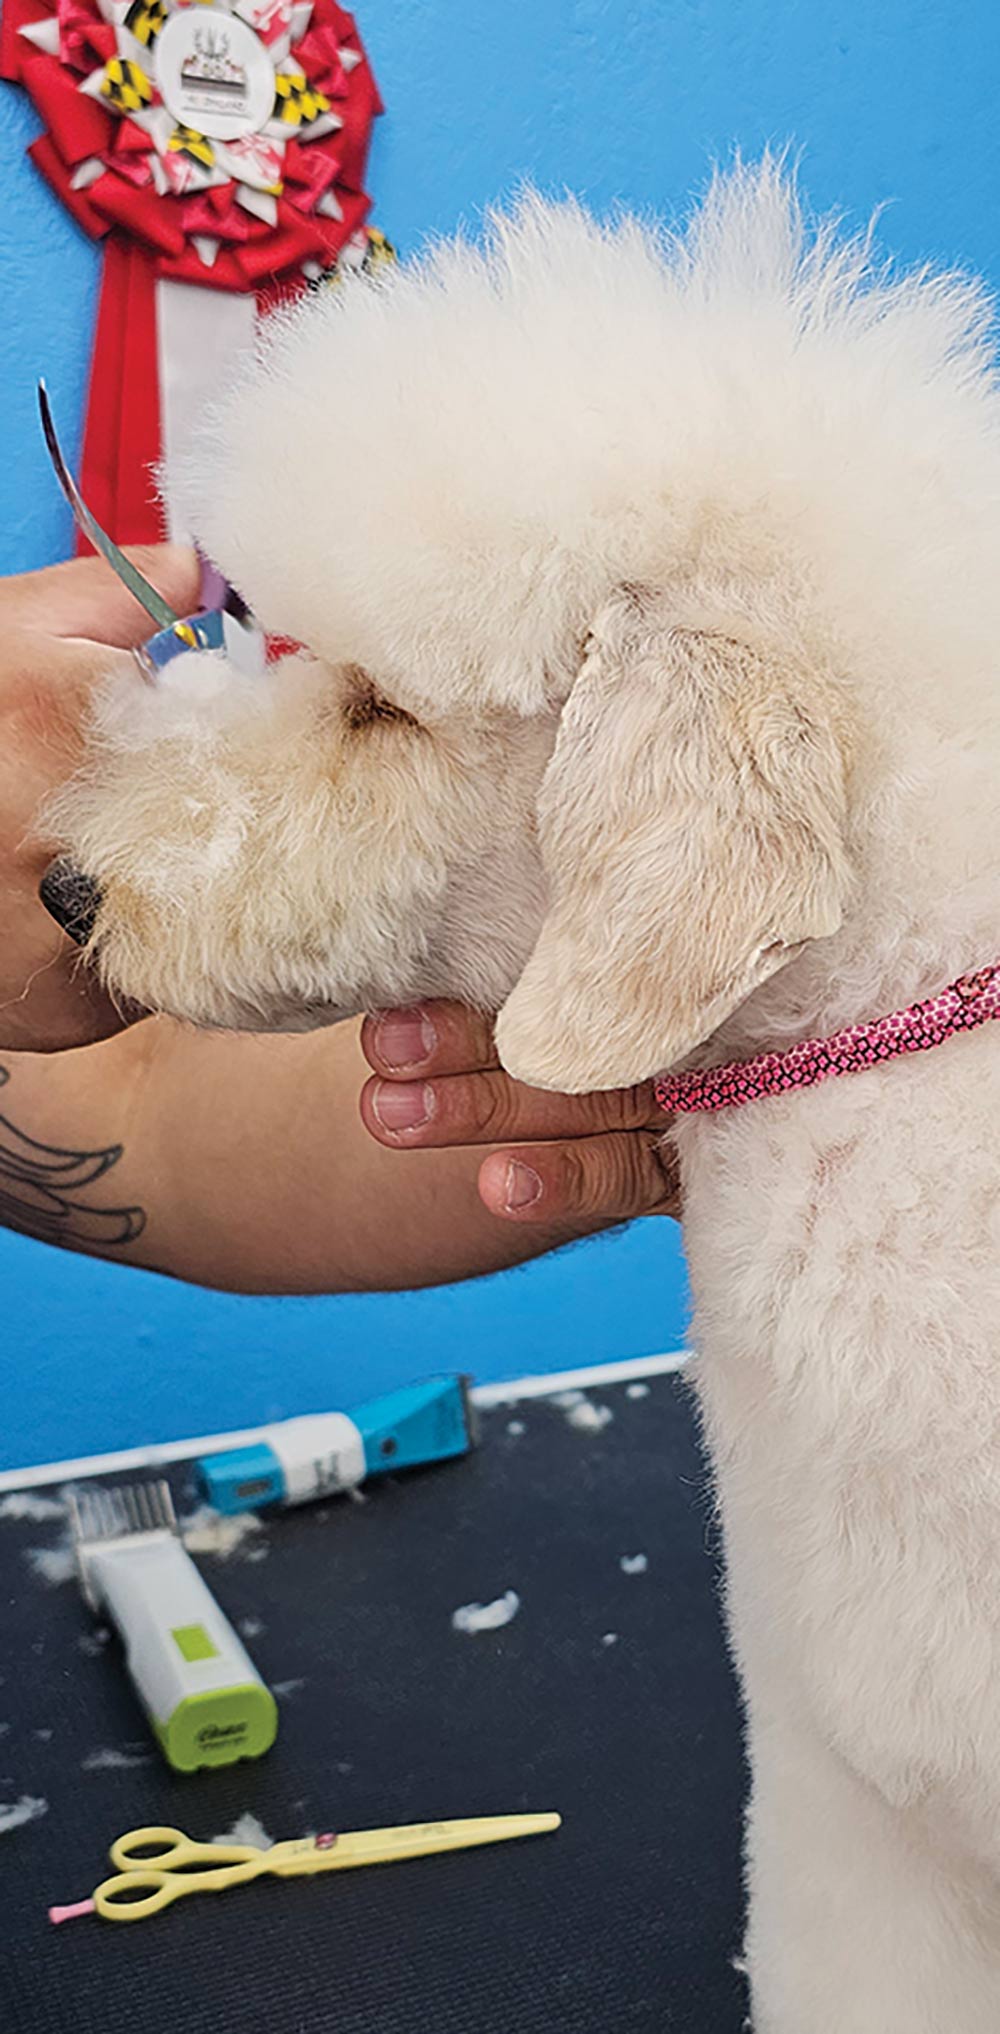 Close-up portrait photograph perspective of a white colored Poodle dog's outer eyes area being cut by a curved violet scissor used by a person's hand